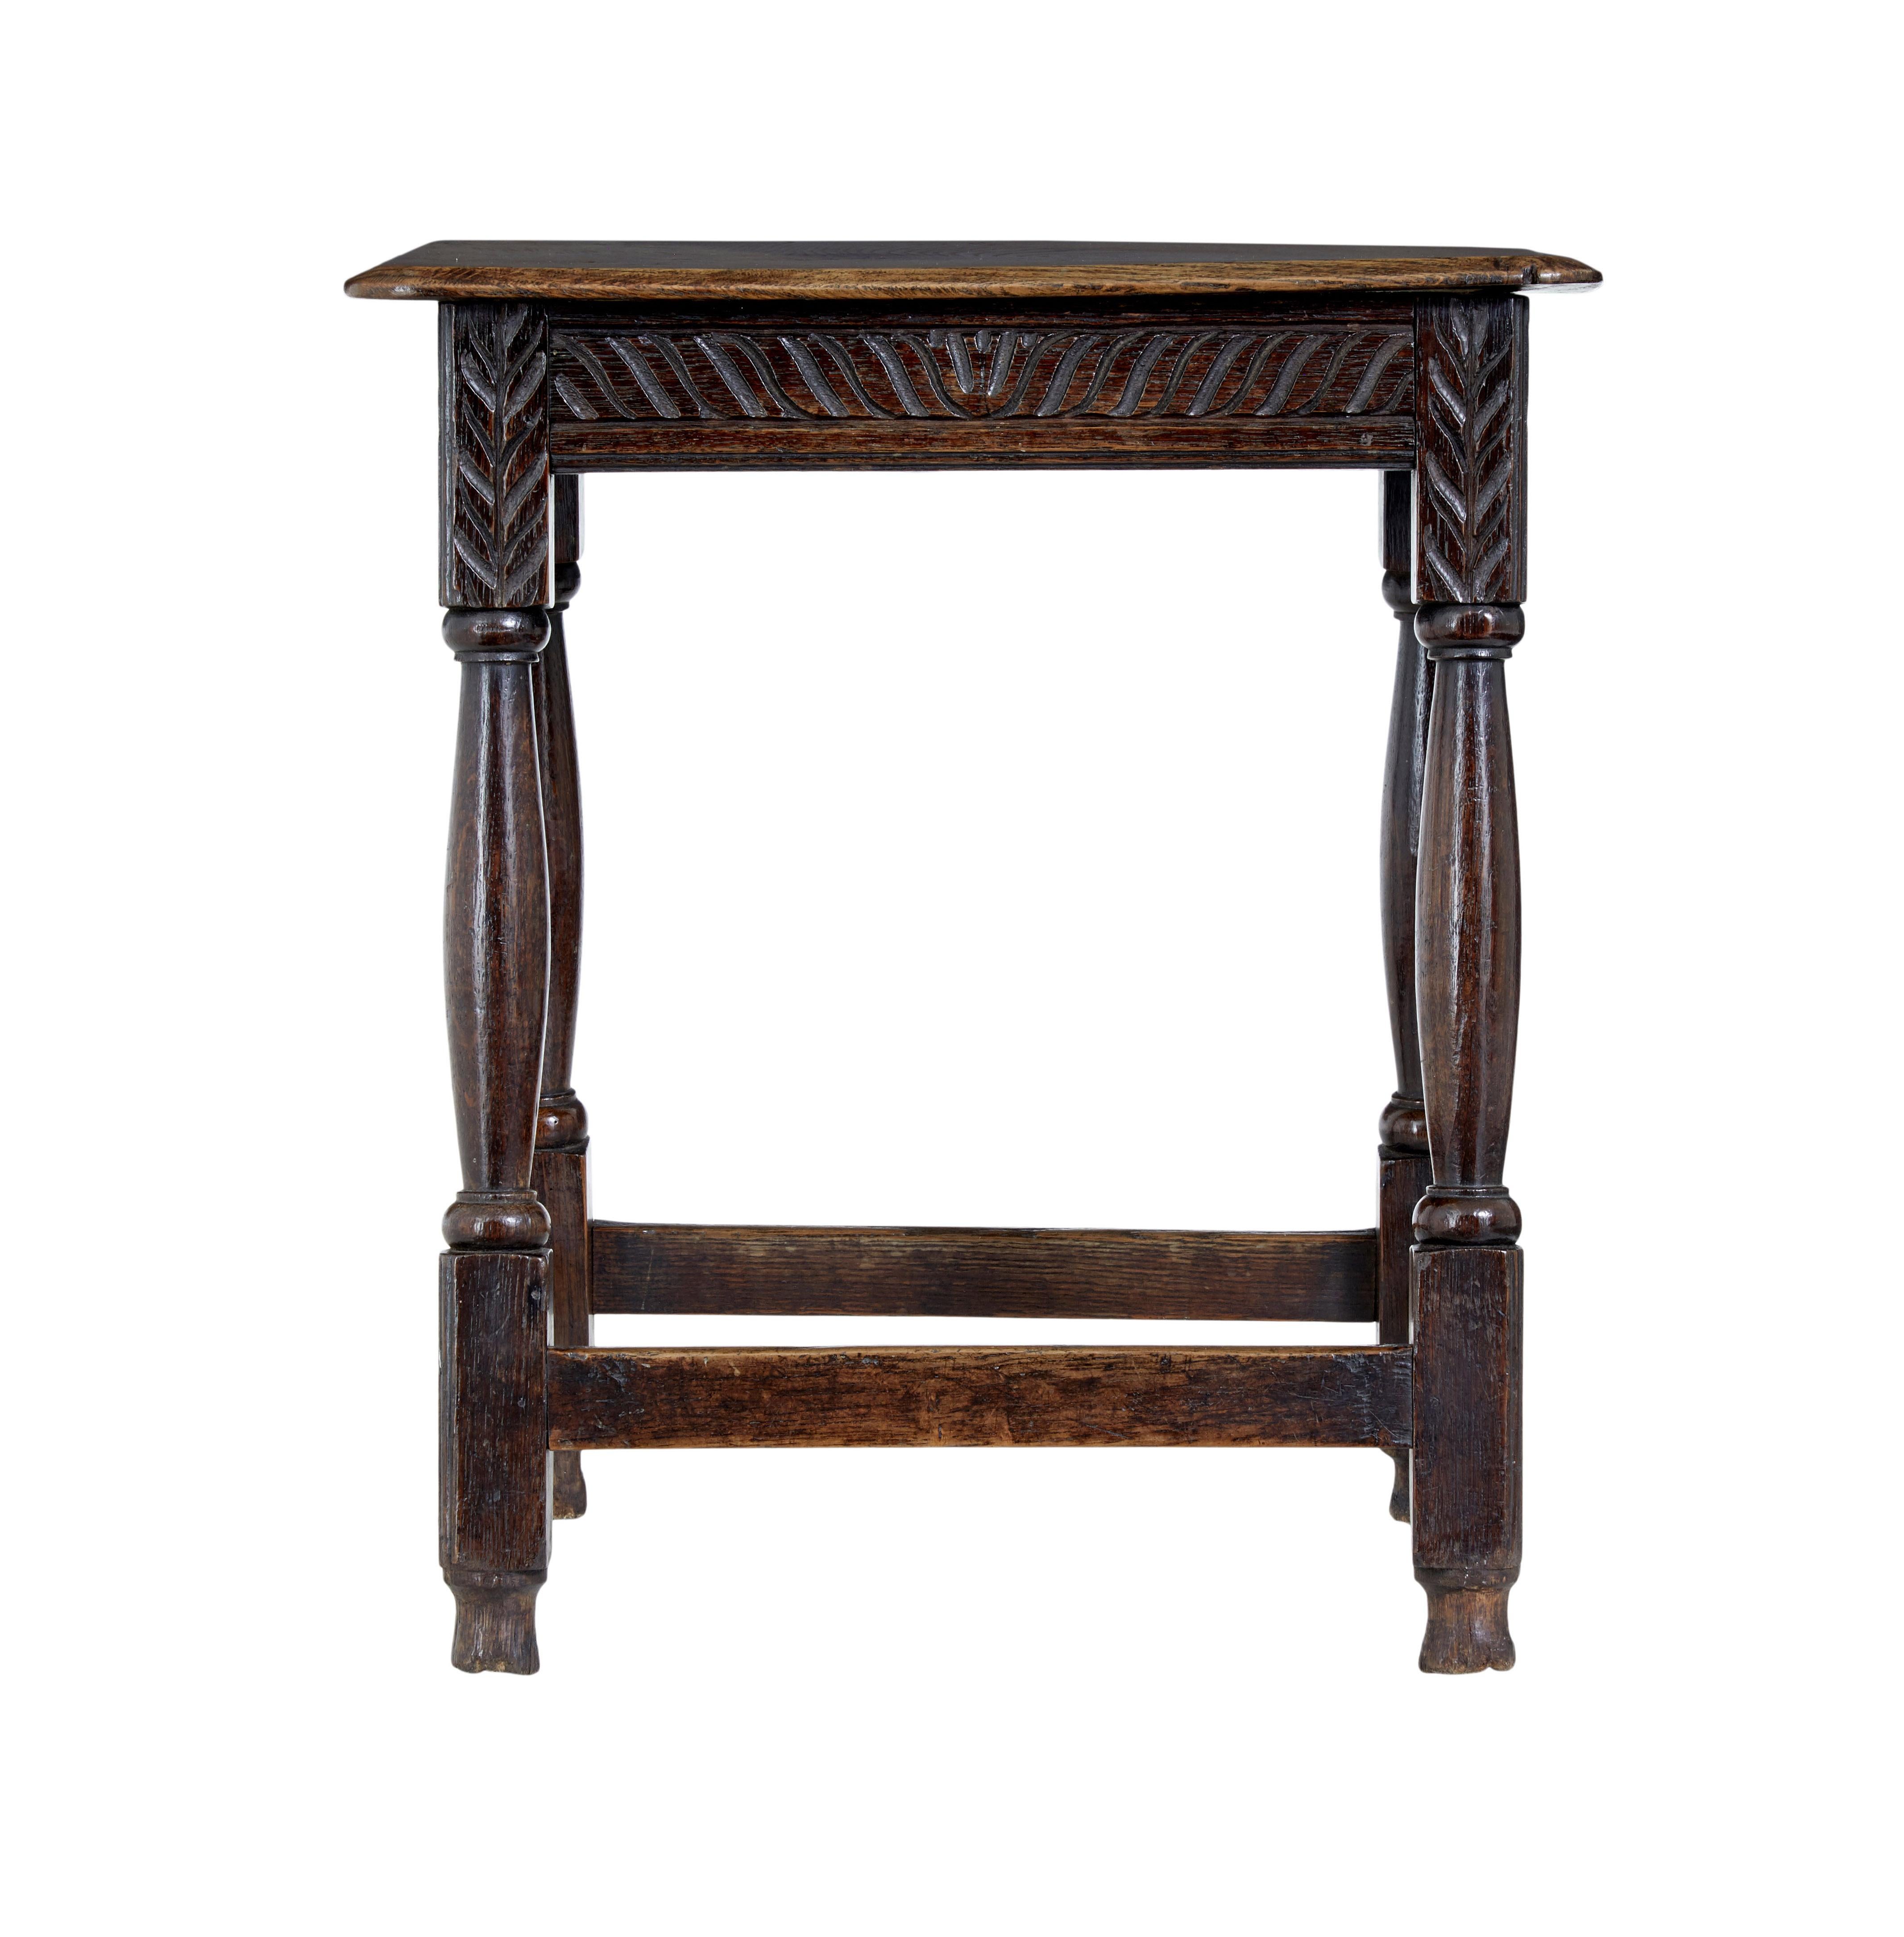 19th century carved oak joint stool circa 1890.

Good quality victorian joint stool of useful proportions.  Due to the height this stool can either be used for it's original purpose or a side table.

Earlier oak top with stunning colour and